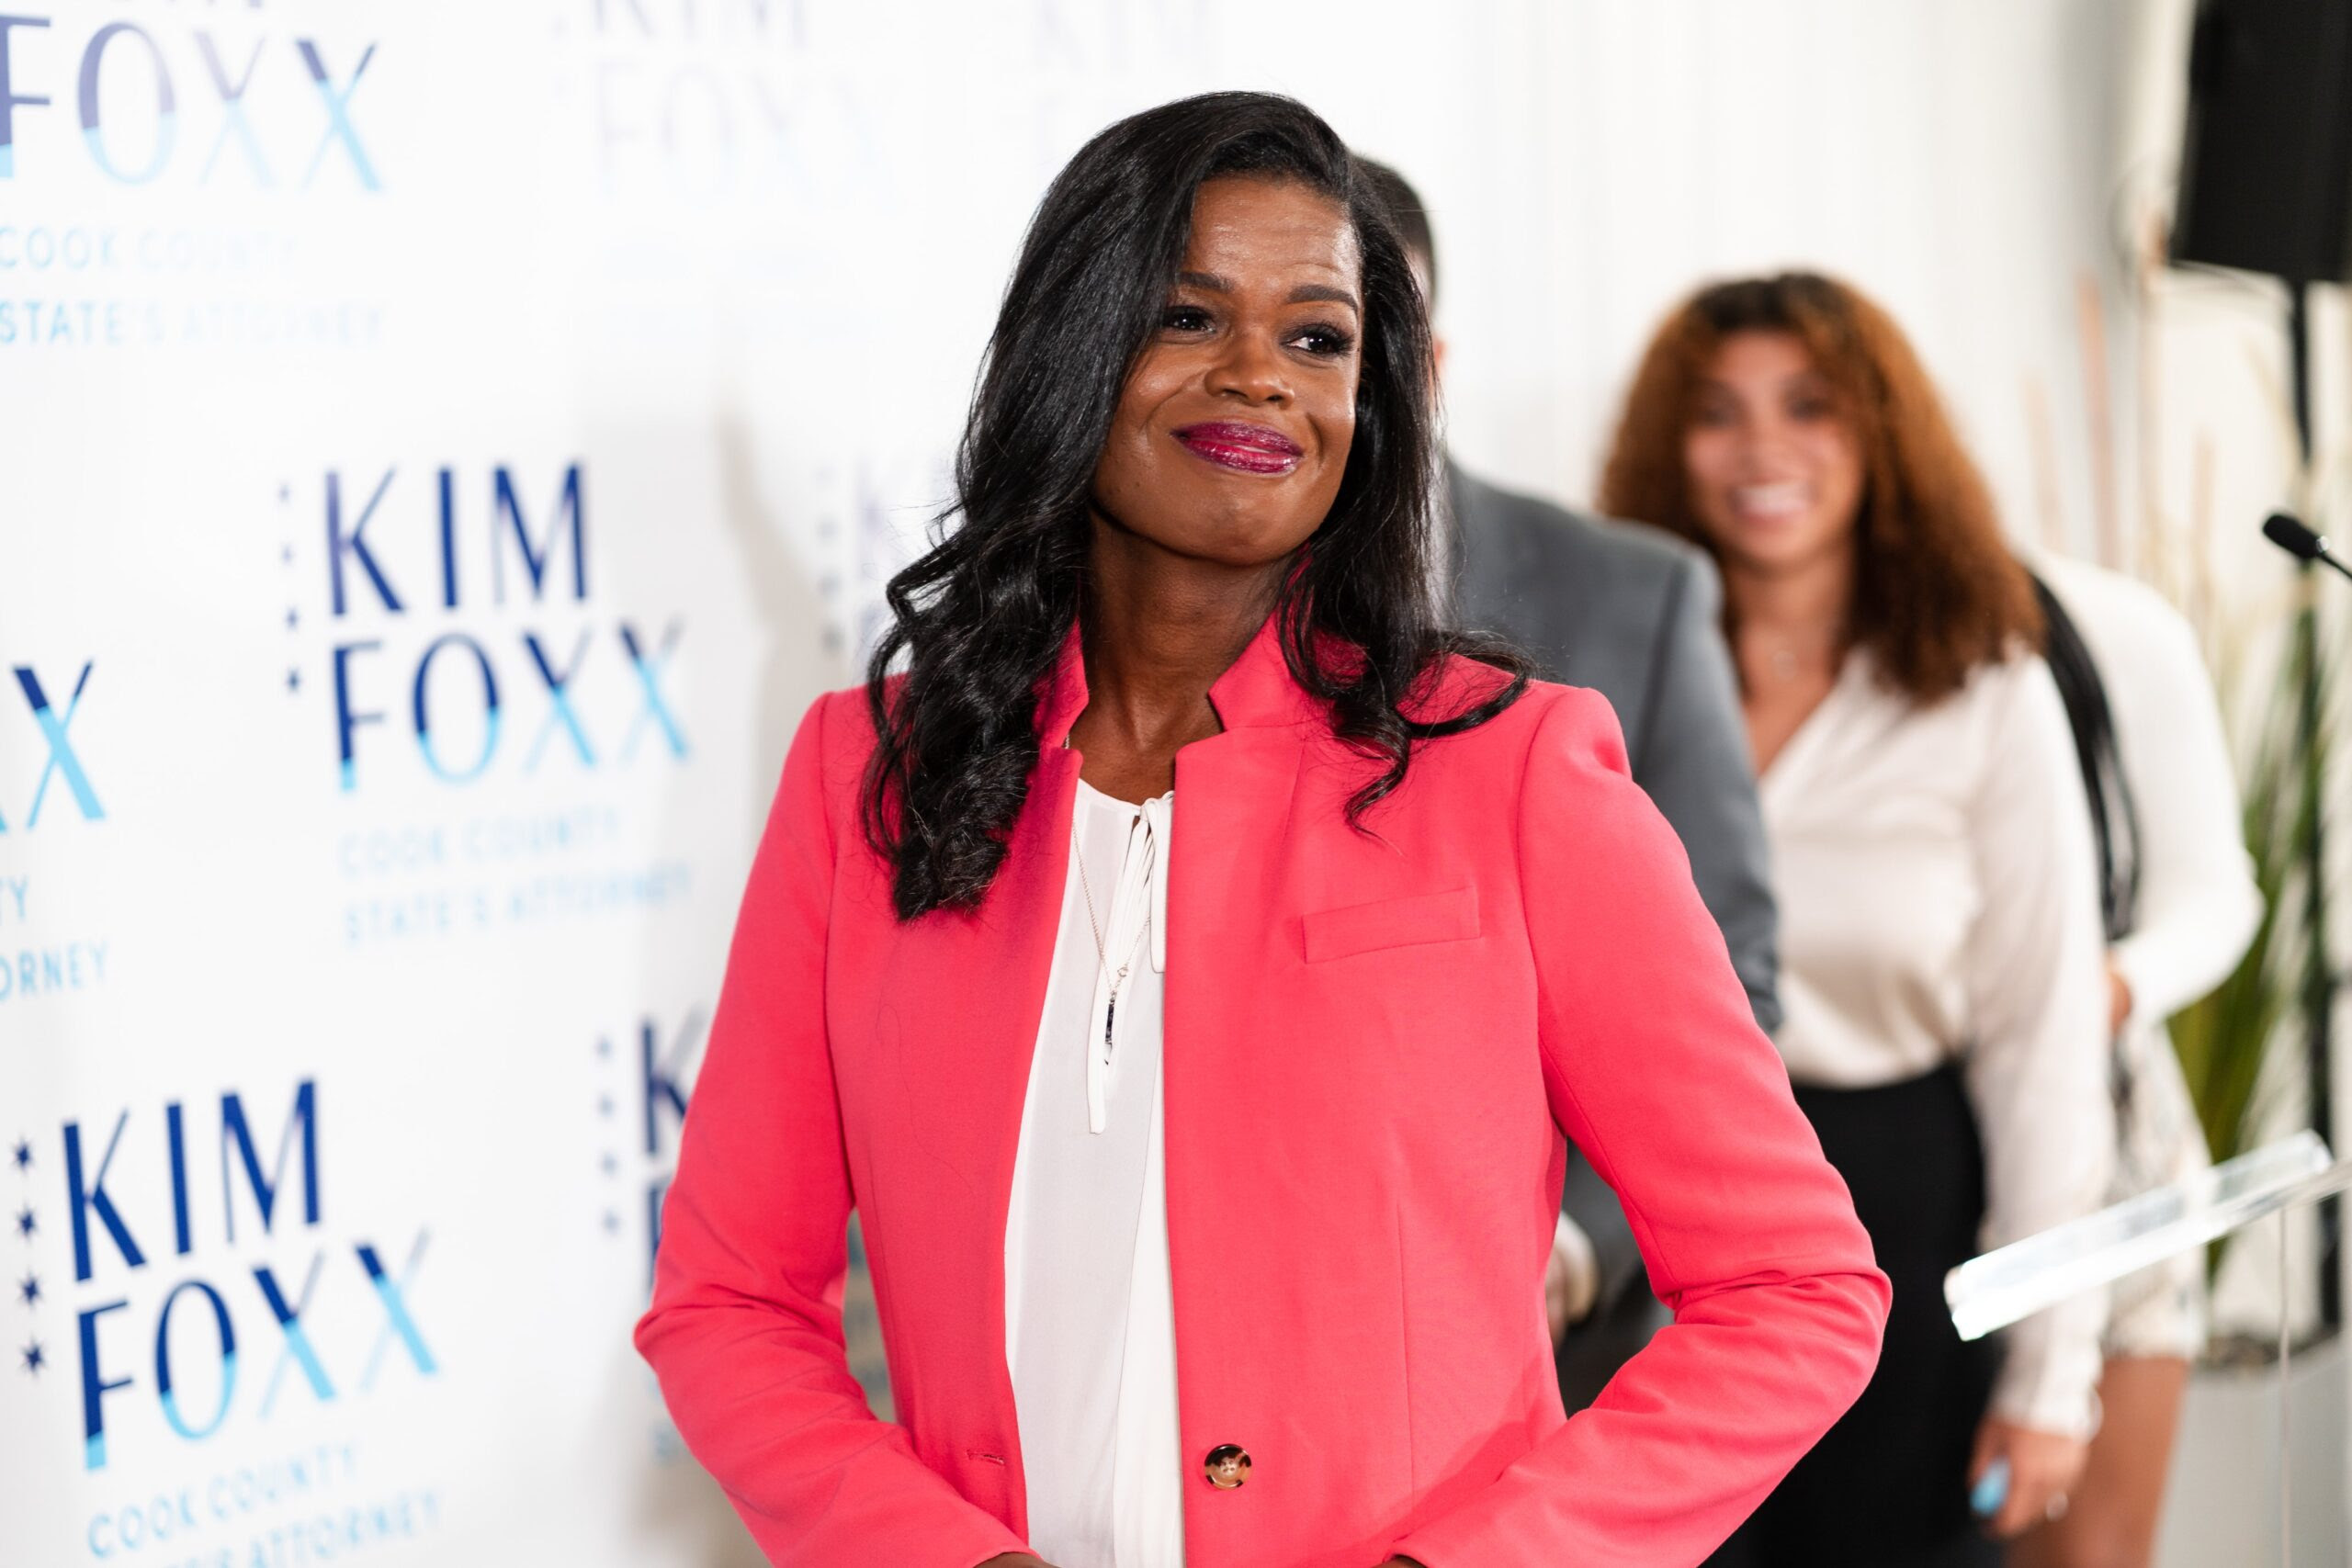 Cook County State’s Attorney Kim Foxx won’t seek reelection